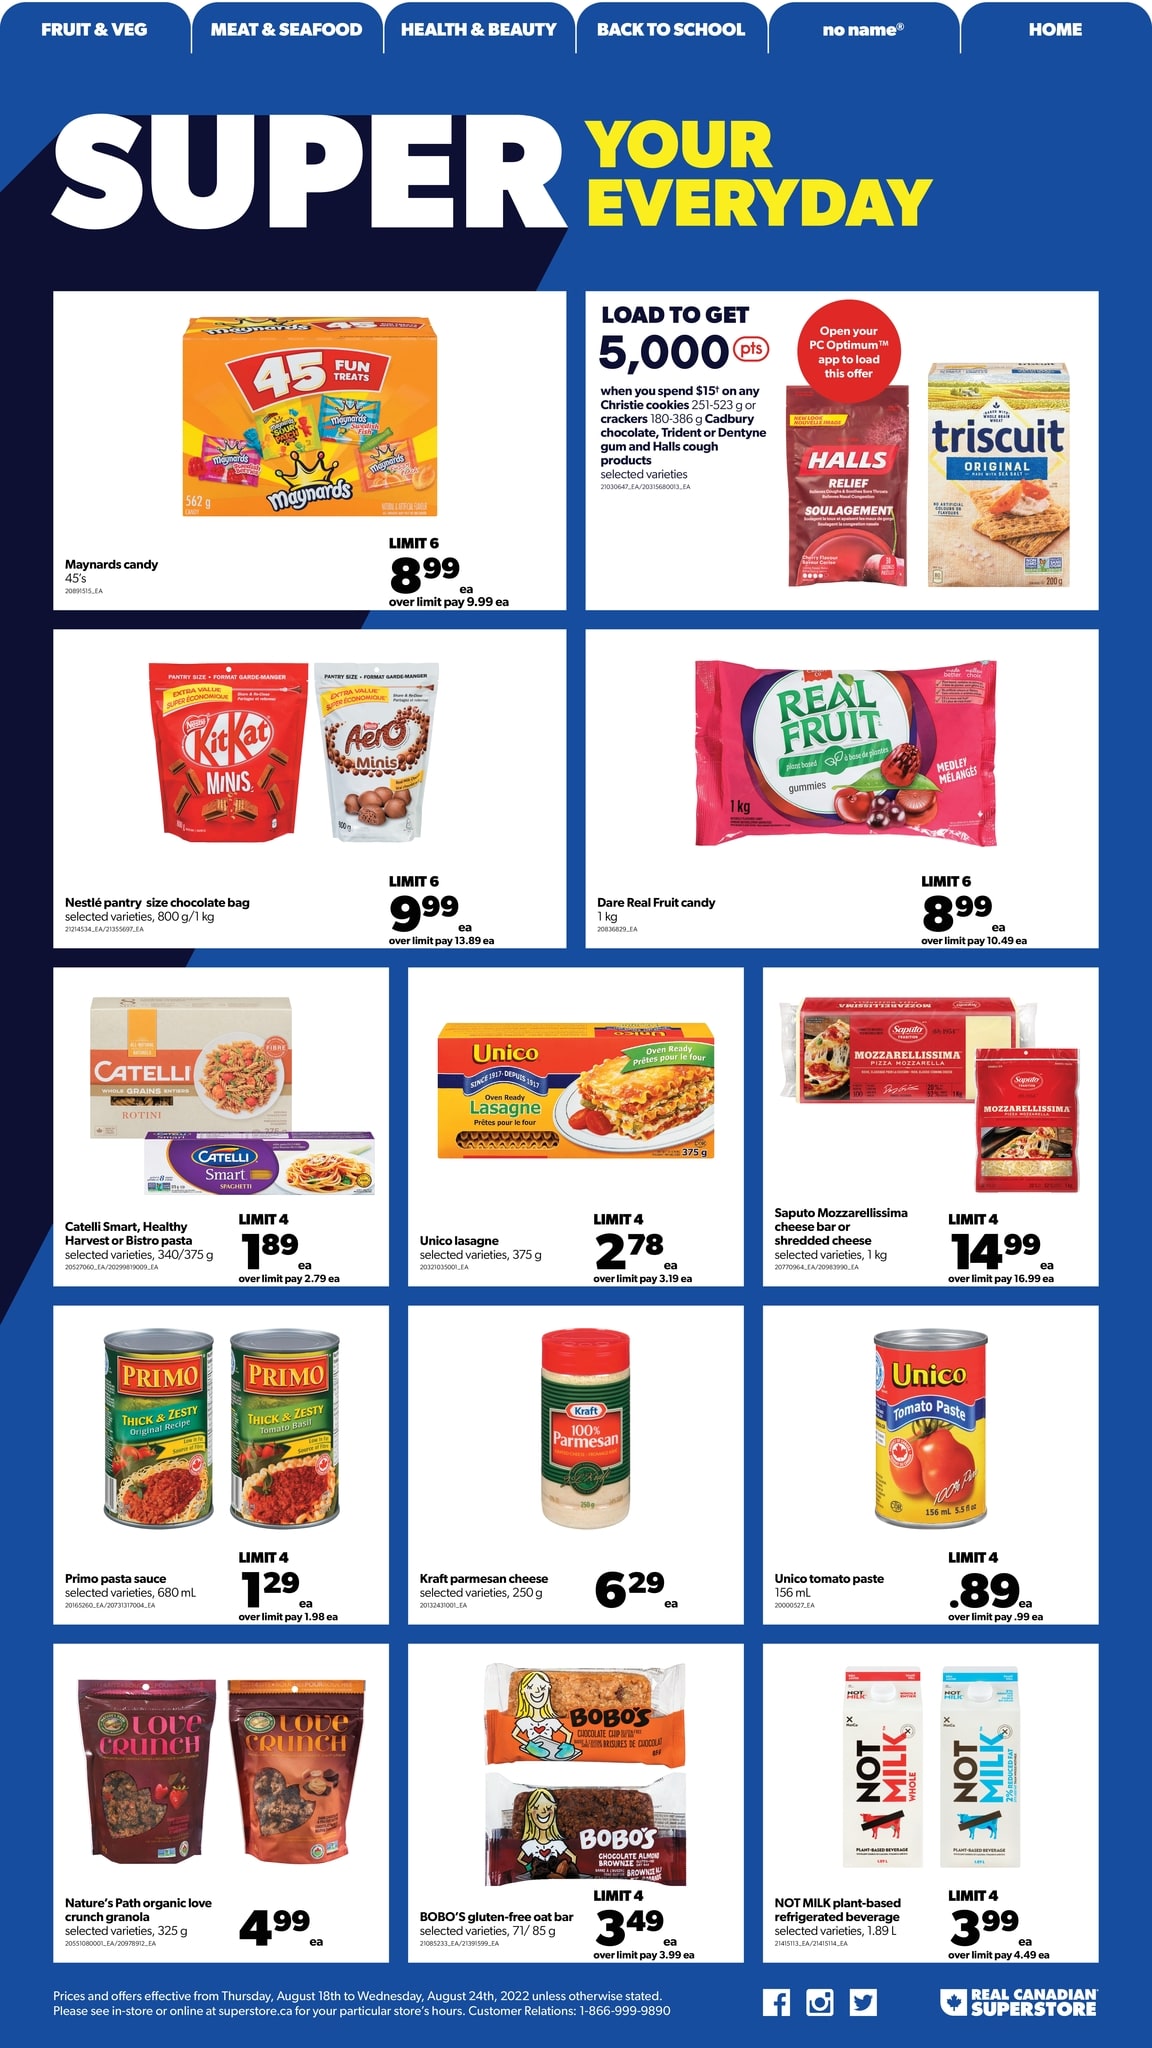 Real Canadian Superstore Western Canada - Weekly Flyer Specials - Page 16